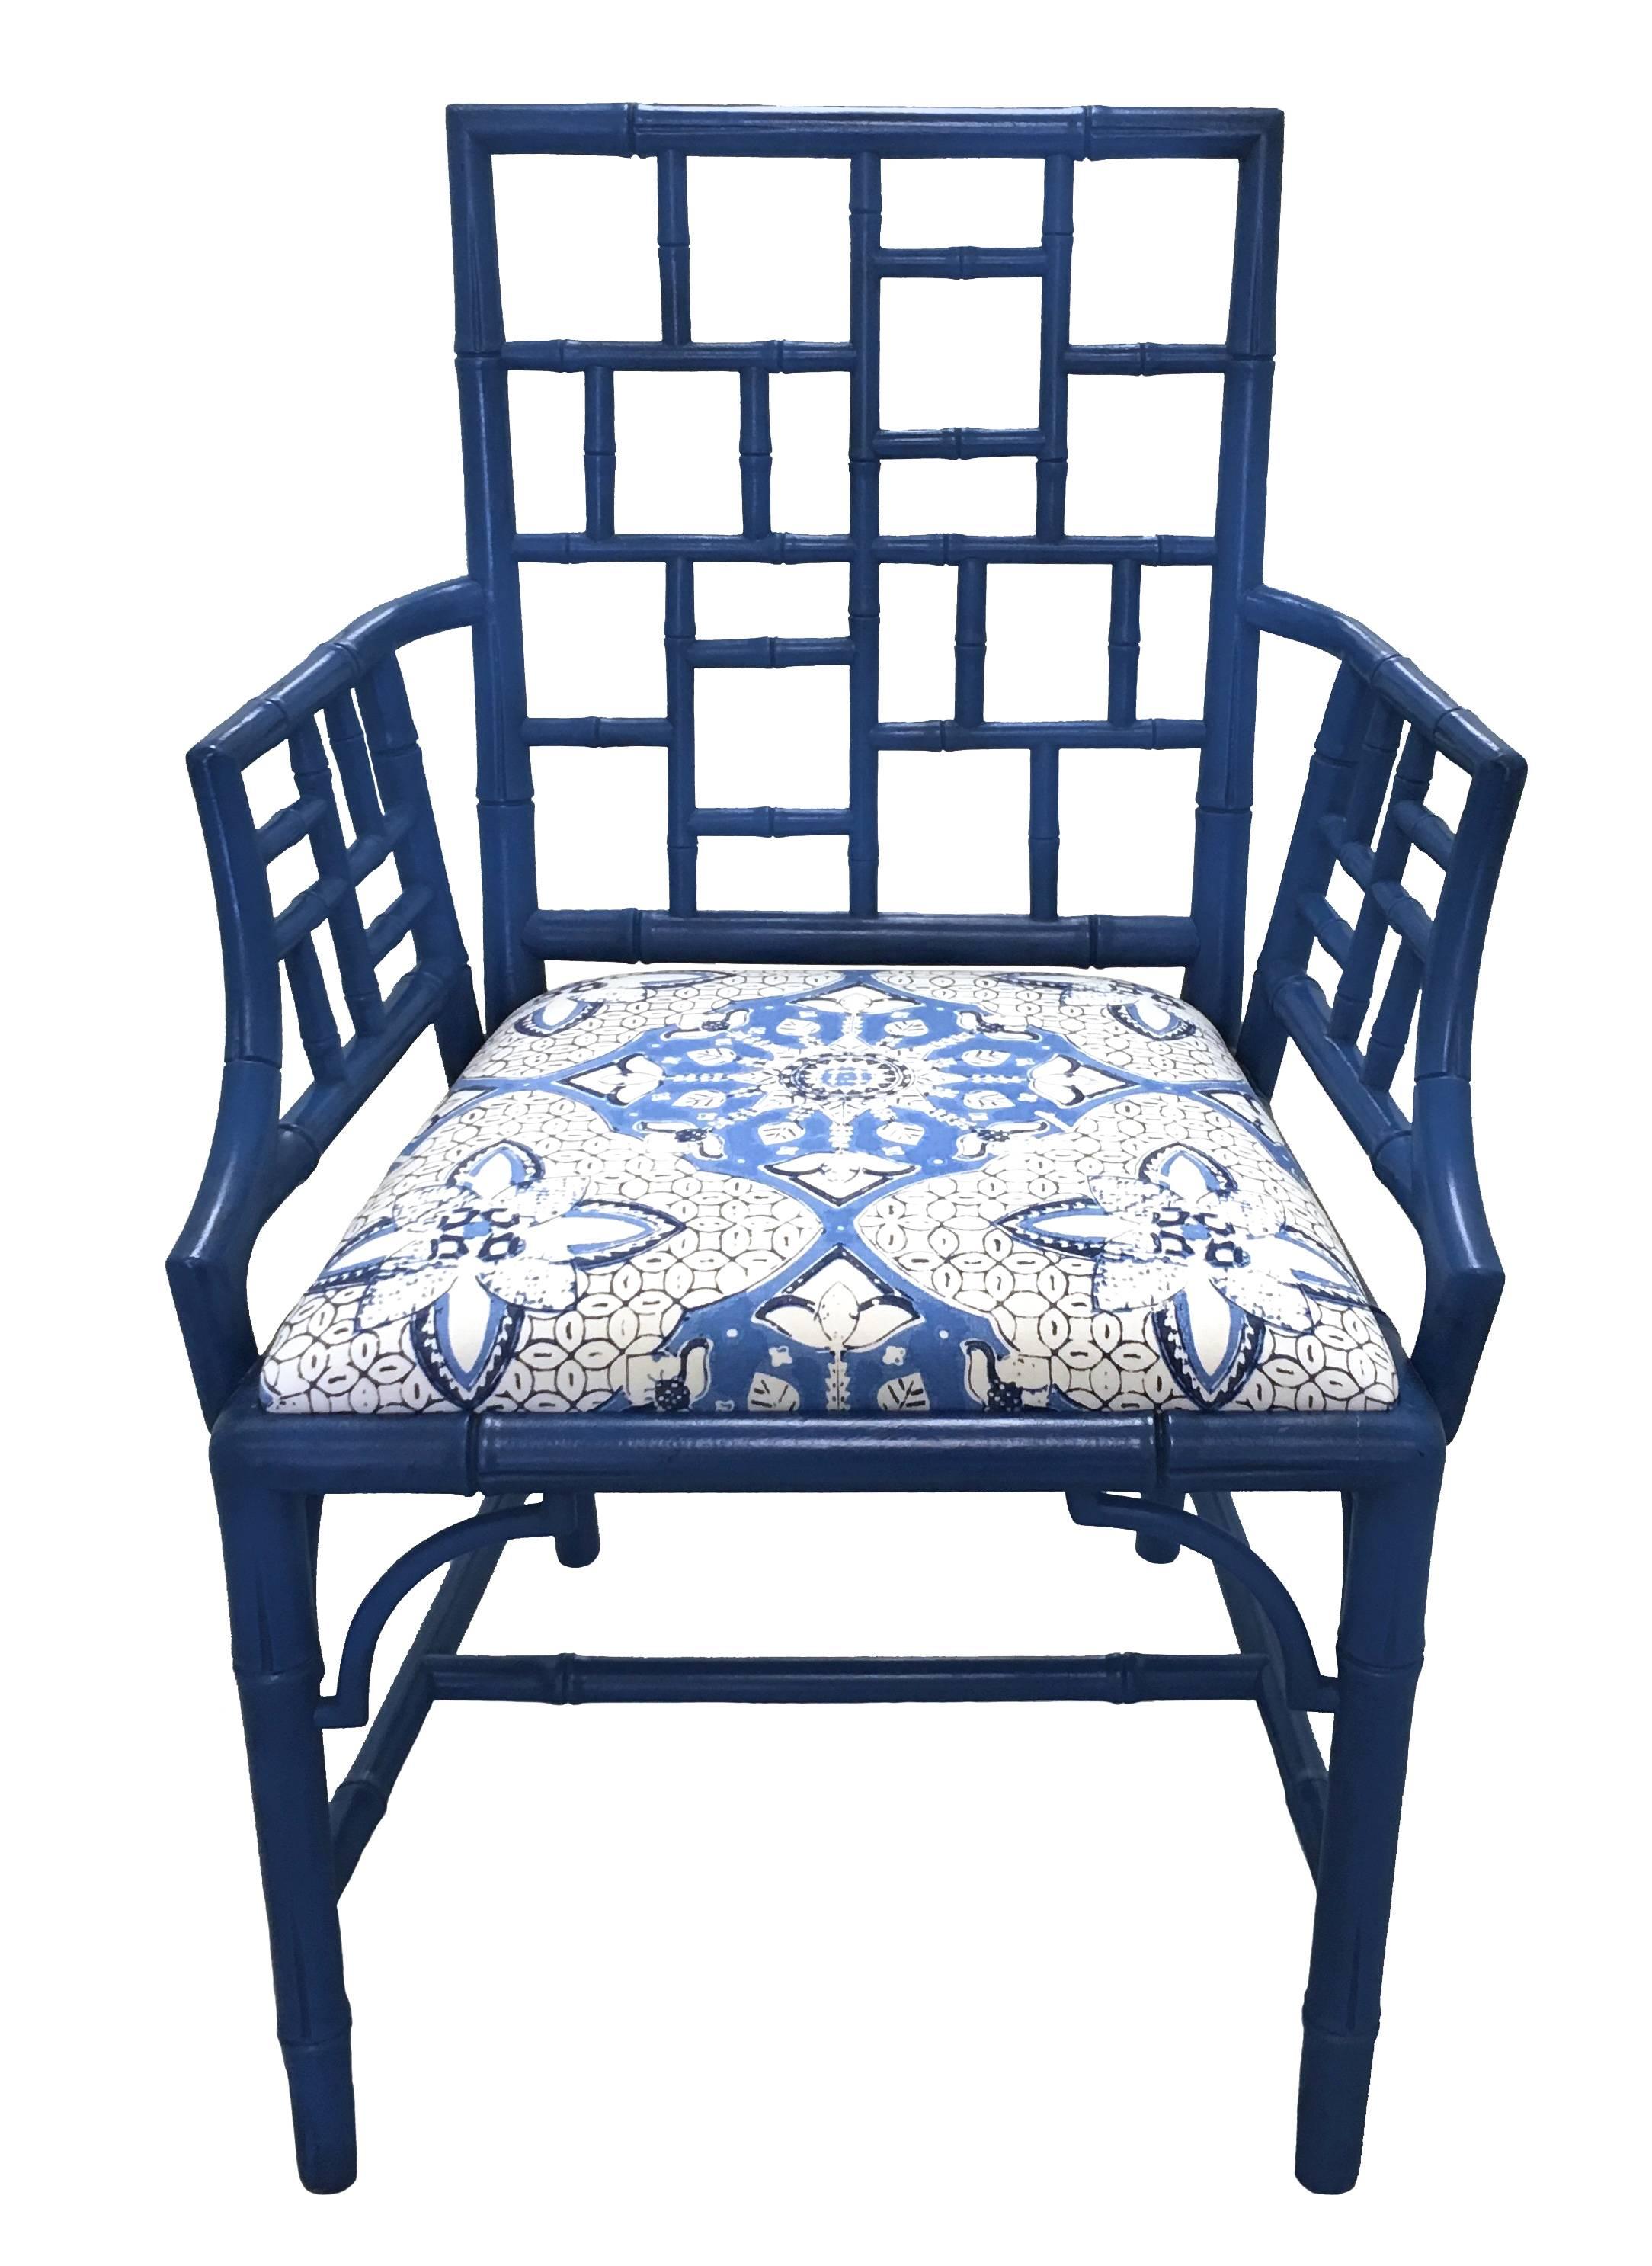 Pair of Chinese Chippendale style armchairs. Newly painted in an antique medium blue finish. Faux bamboo detailing. Newly upholstered in Quadrille 'New Batik' fabric in blue/white.